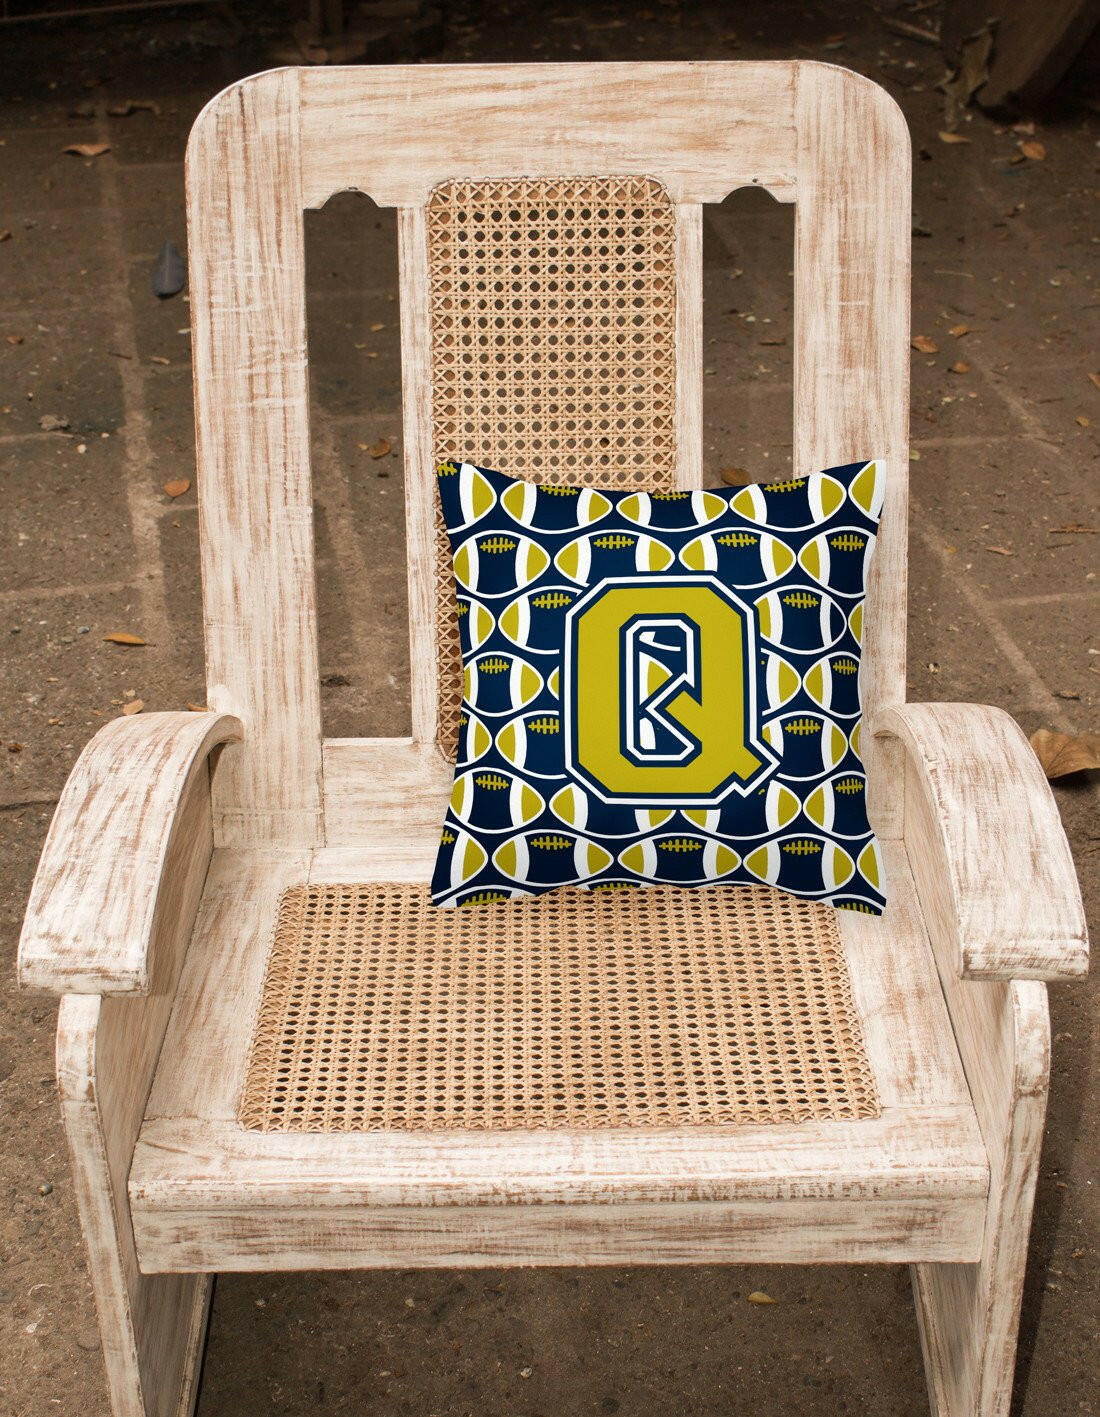 Letter Q Football Blue and Gold Fabric Decorative Pillow CJ1074-QPW1414 by Caroline's Treasures